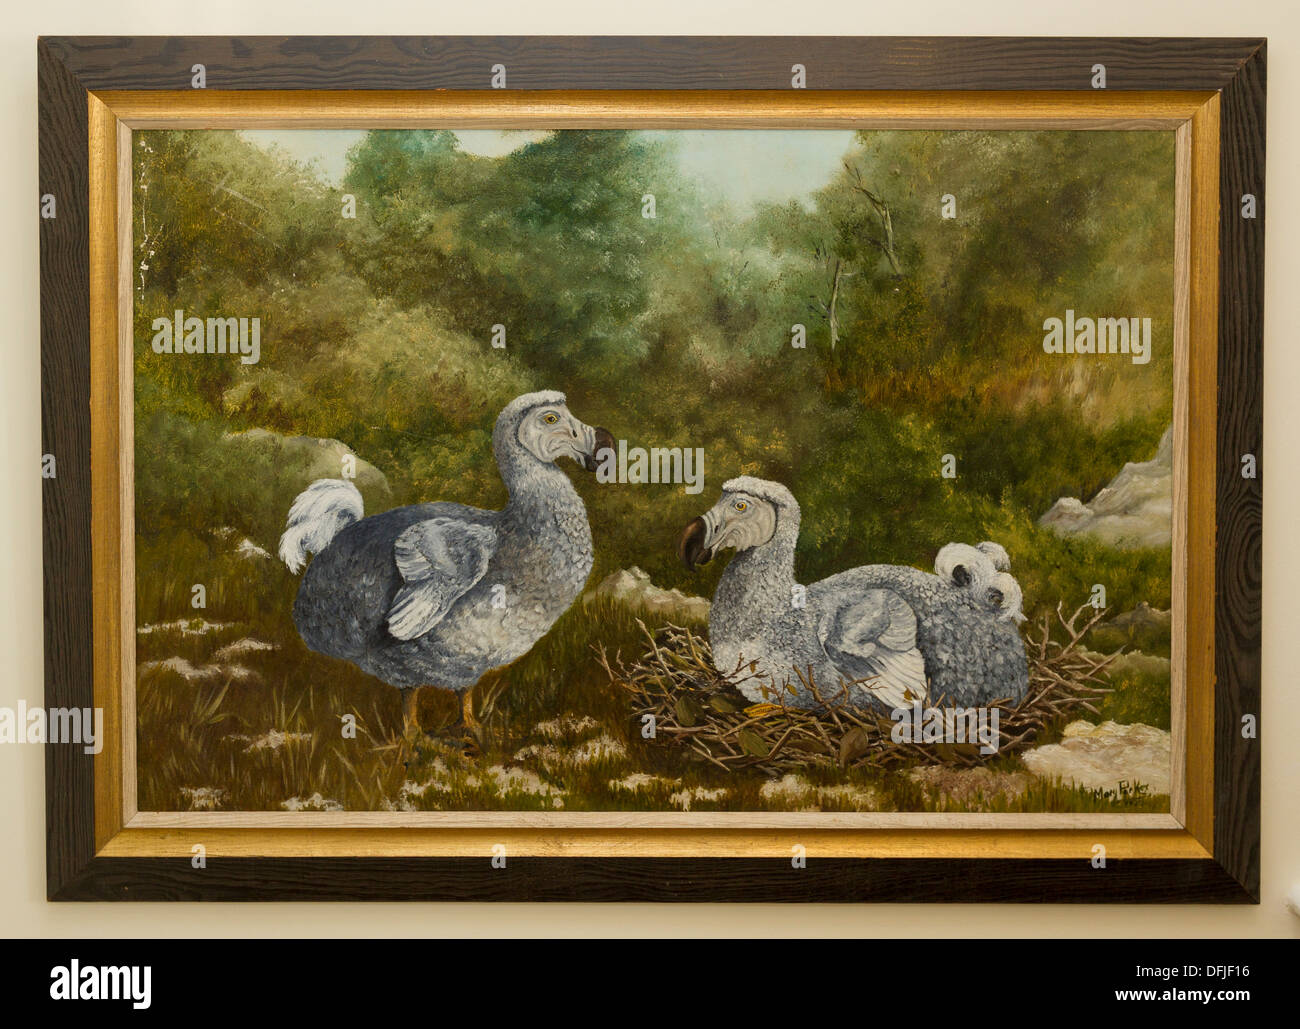 Durrell Wildlife Conservation Trust  The Gerald Durrell Story Exhibition Painting of two Dodos Stock Photo